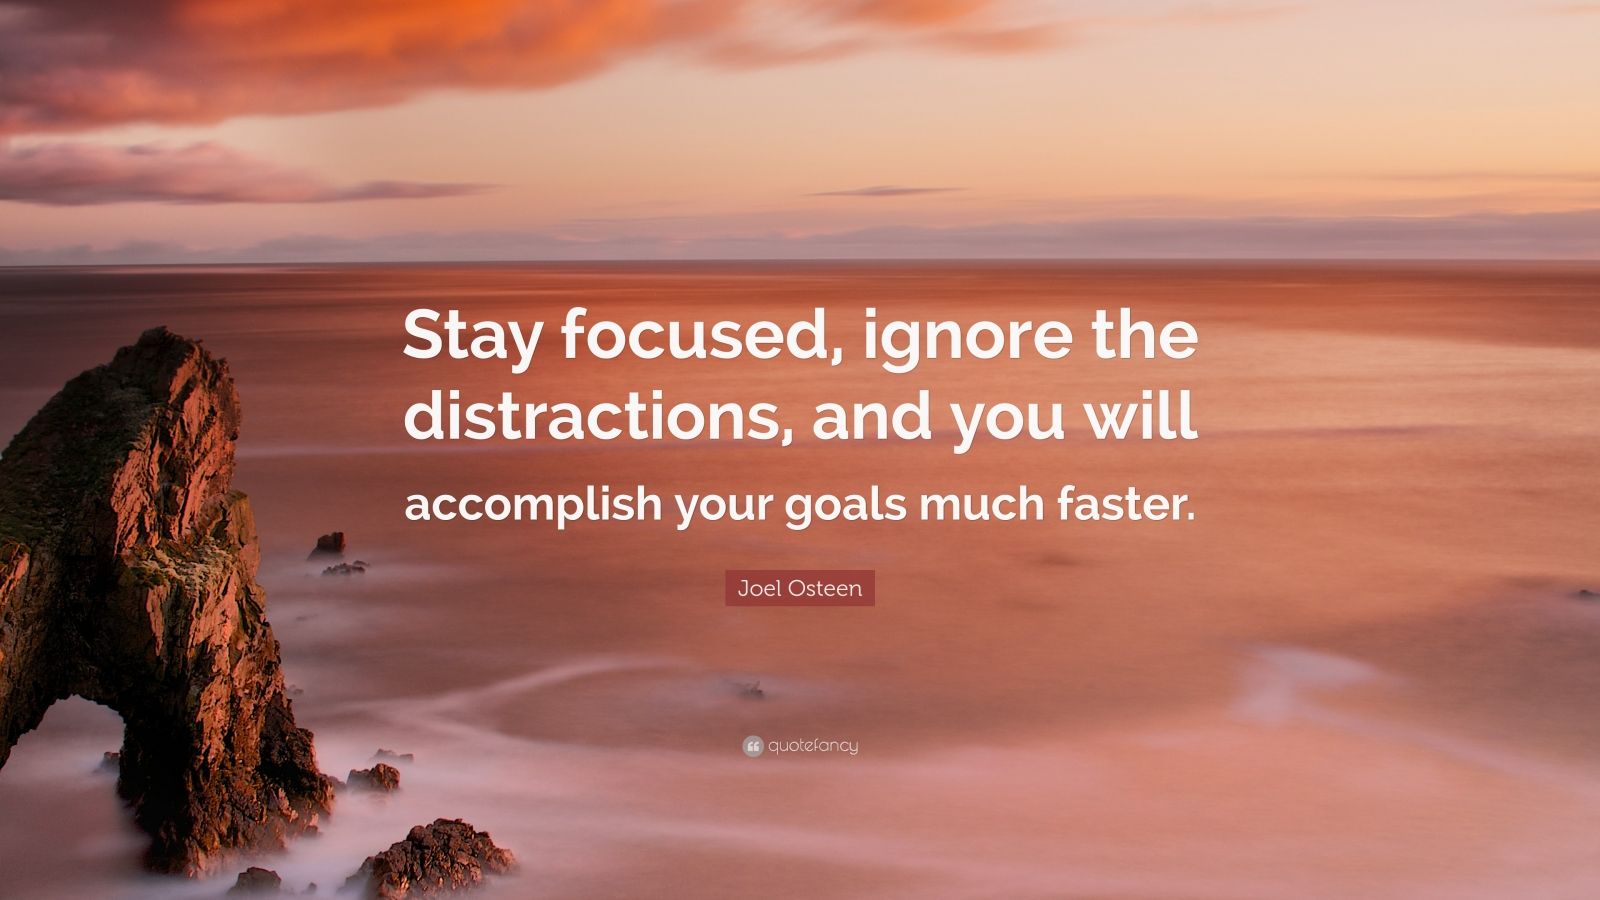 Joel Osteen Quote: “Stay focused, ignore the distractions, and you will ...